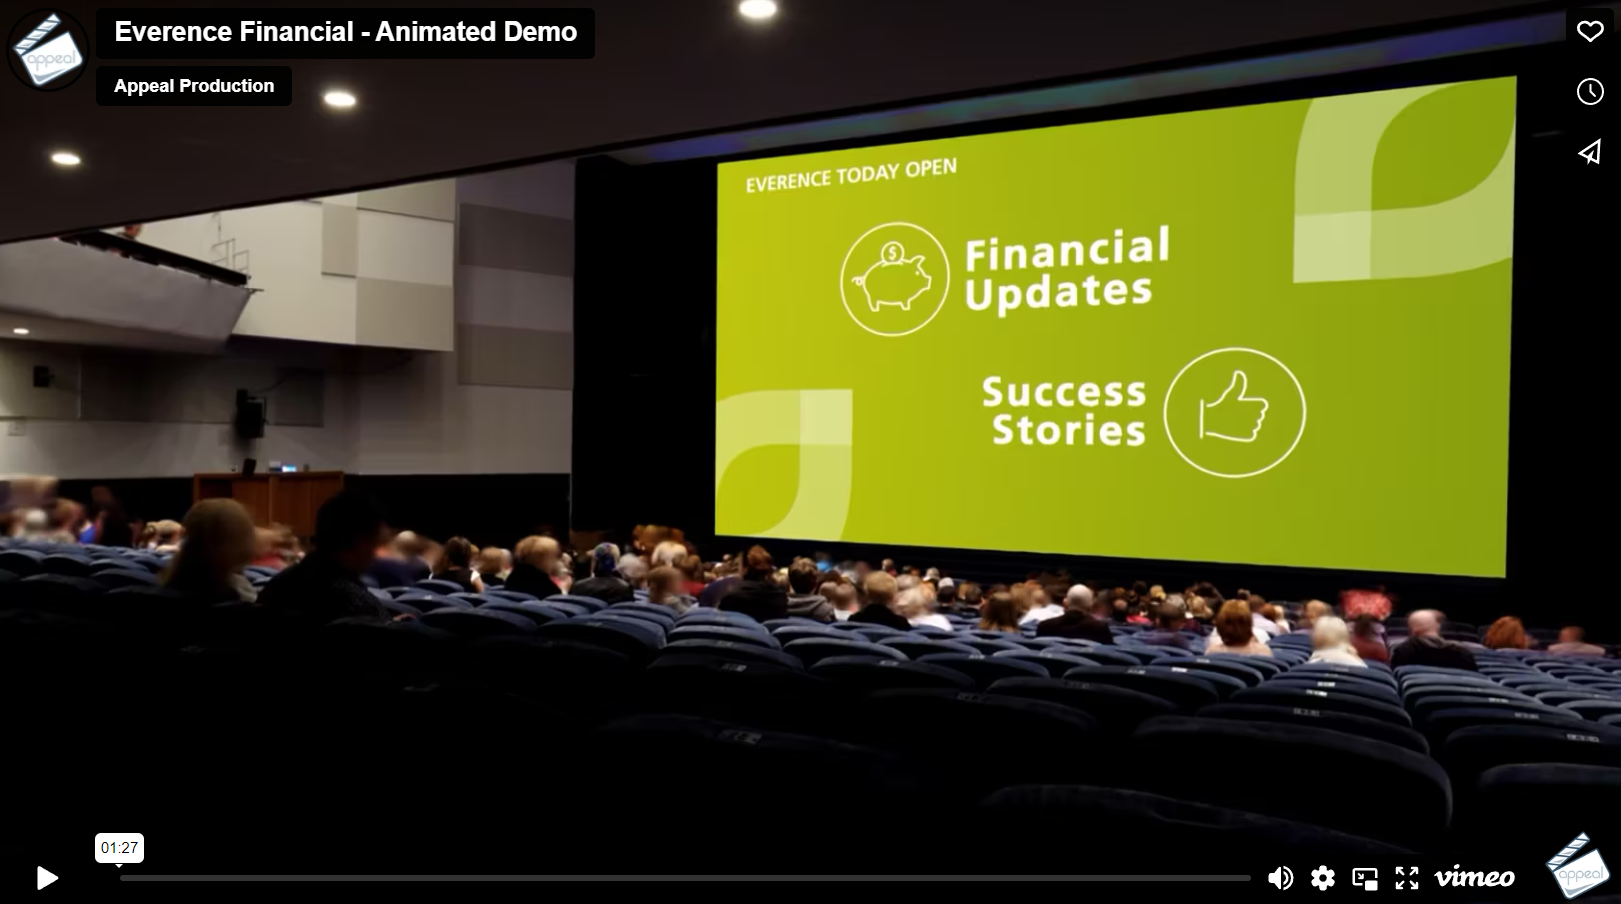 Animated Graphics: Everence Financial